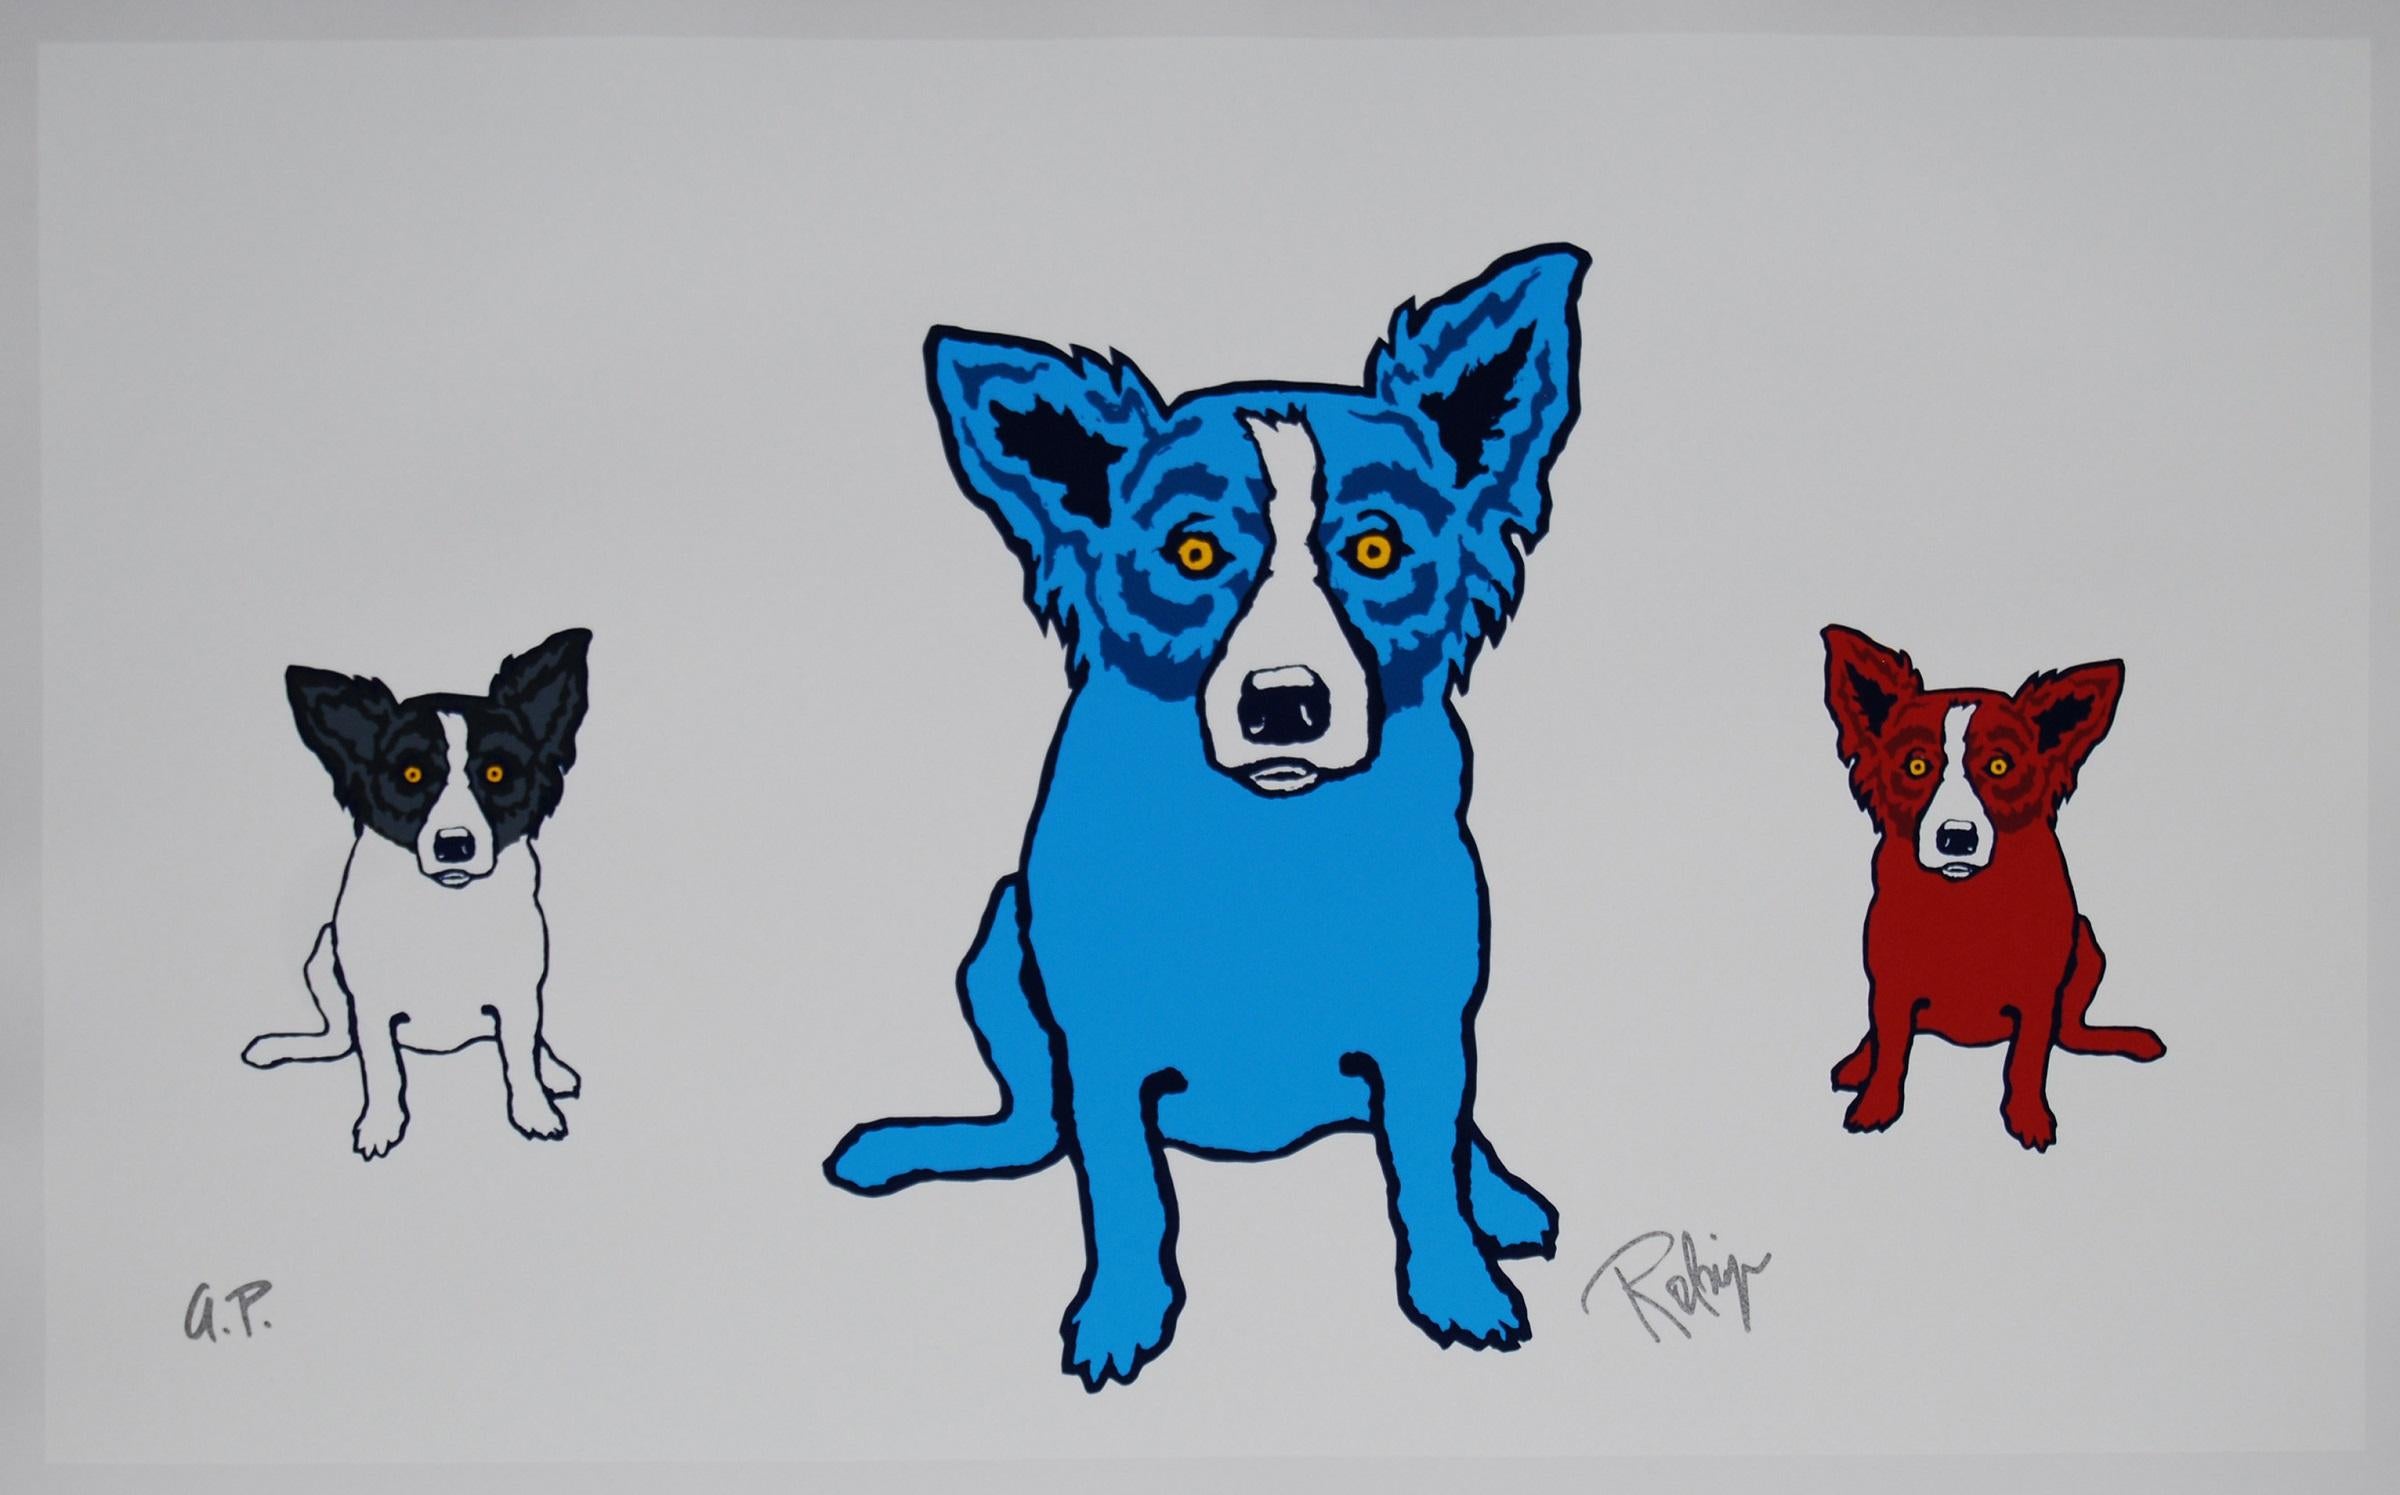 George Rodrigue Animal Print - Waiting For My TV Dinner White Proof - Signed Silkscreen Blue Dog Print